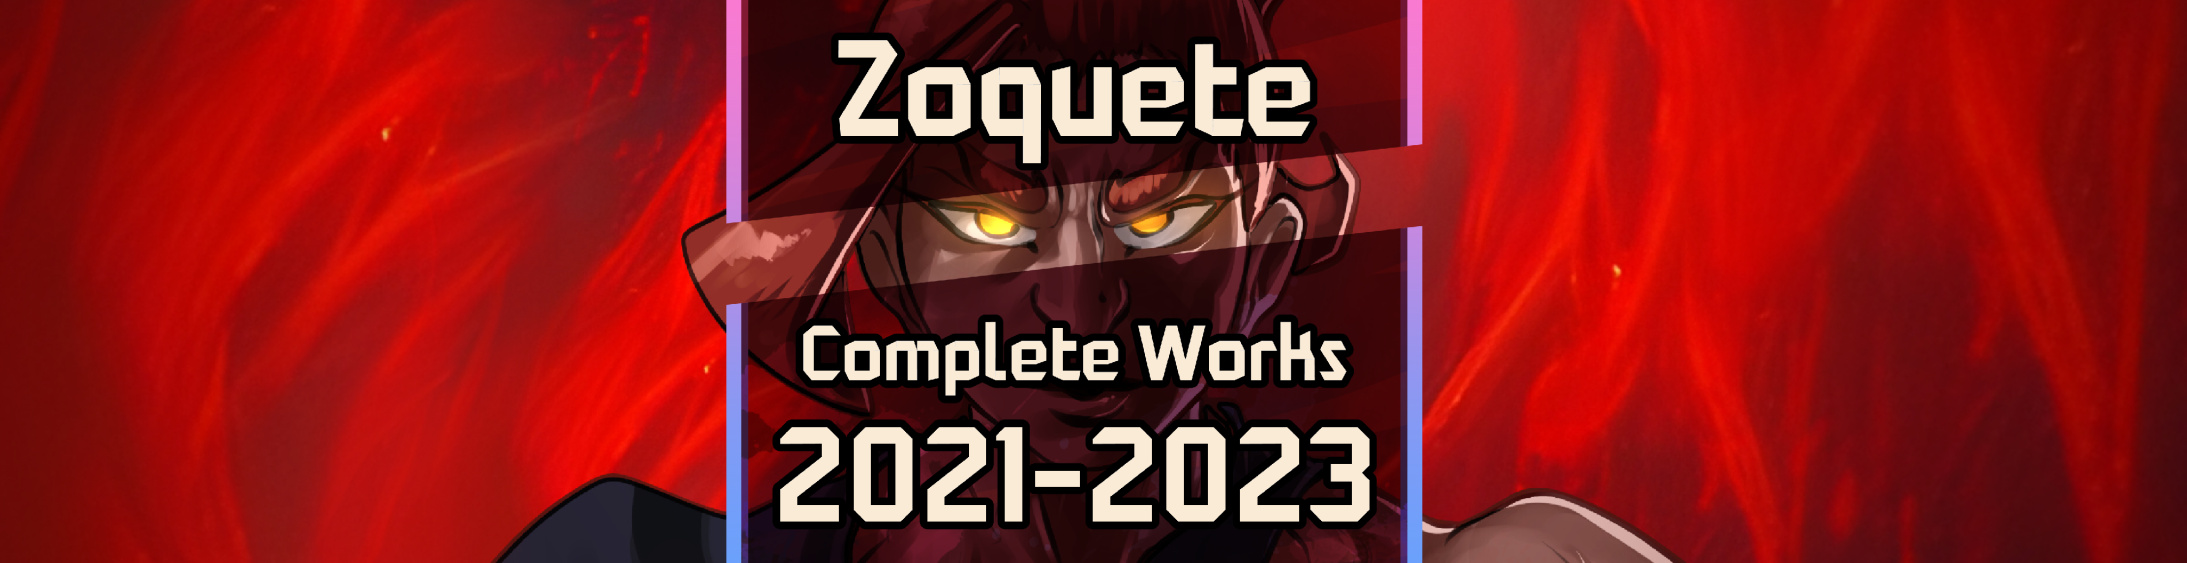 Complete Works 2021-2023